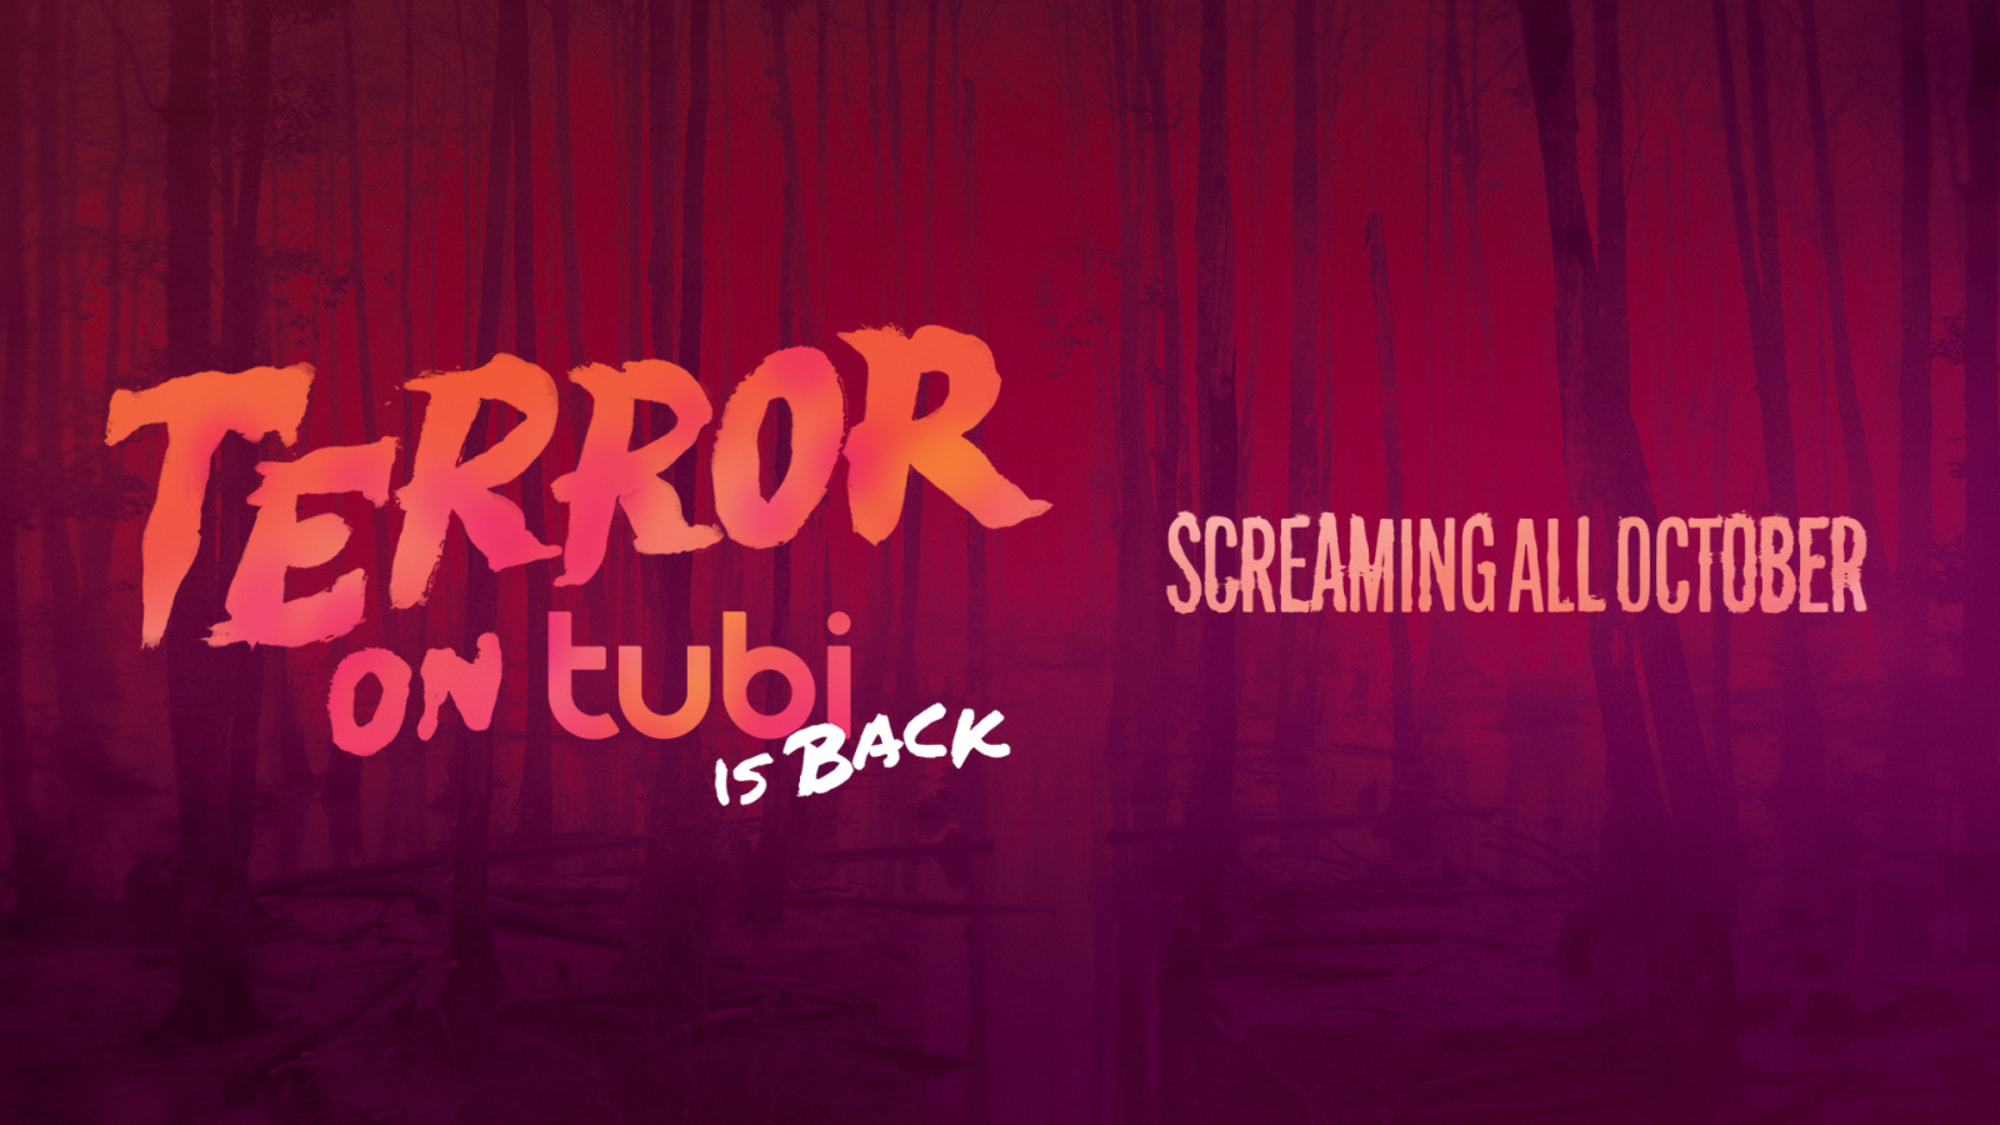 Something to look forward to Terror on Tubi returns in October